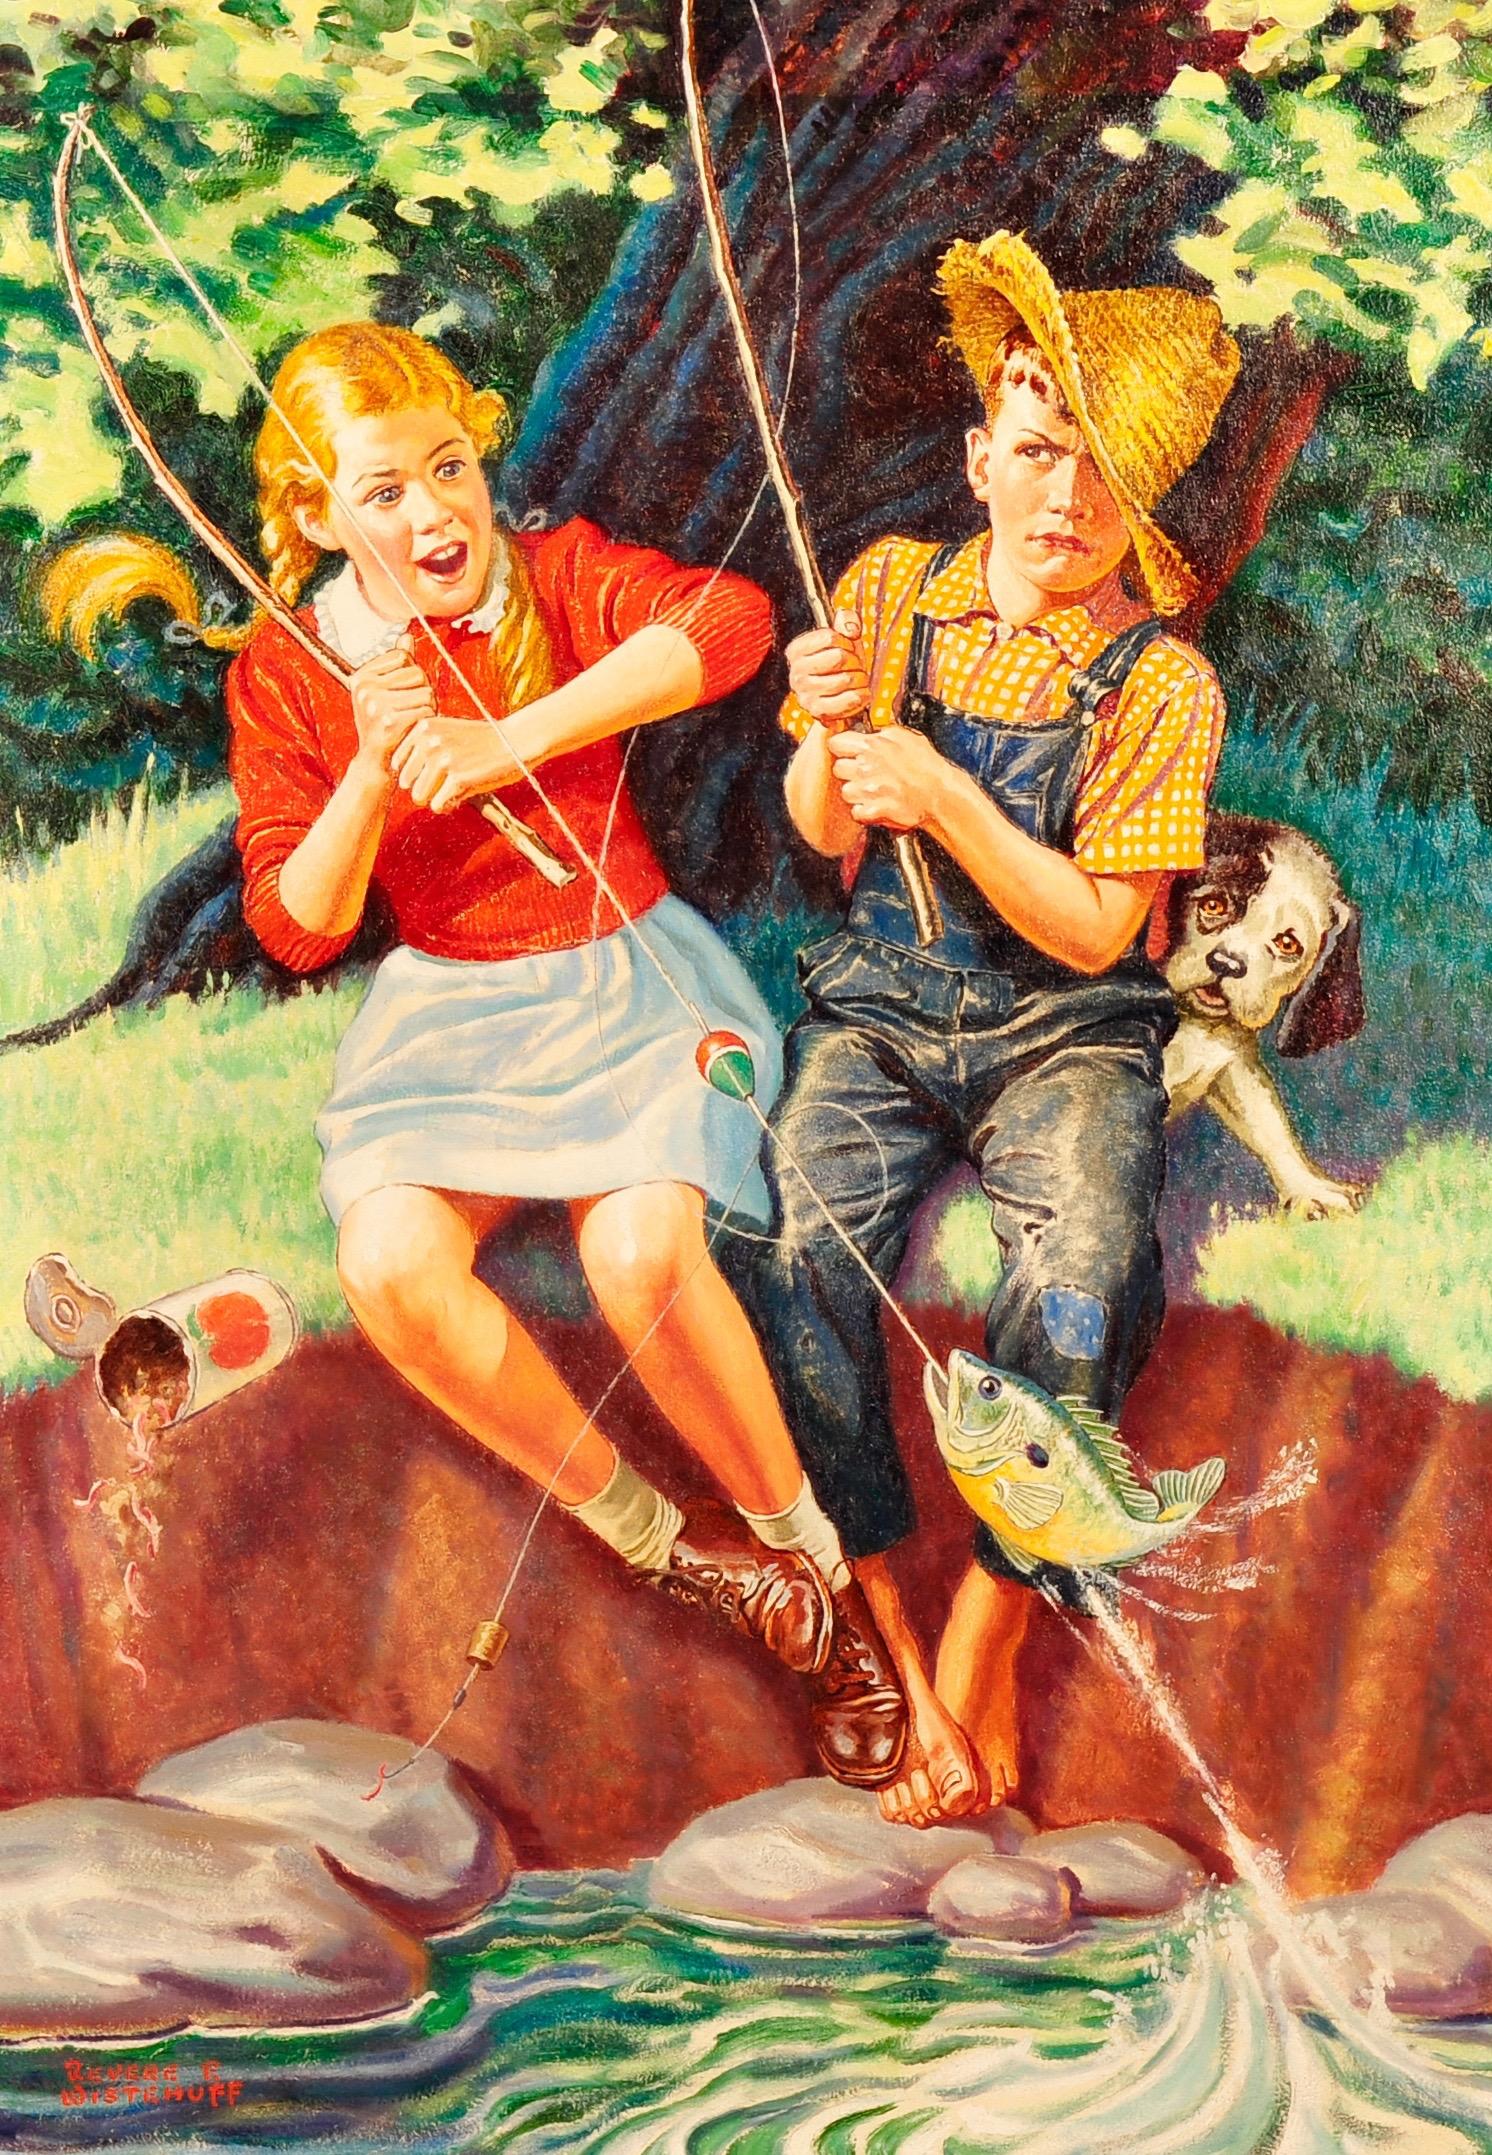 Kids Fishing - Painting by Revere Wistehuff